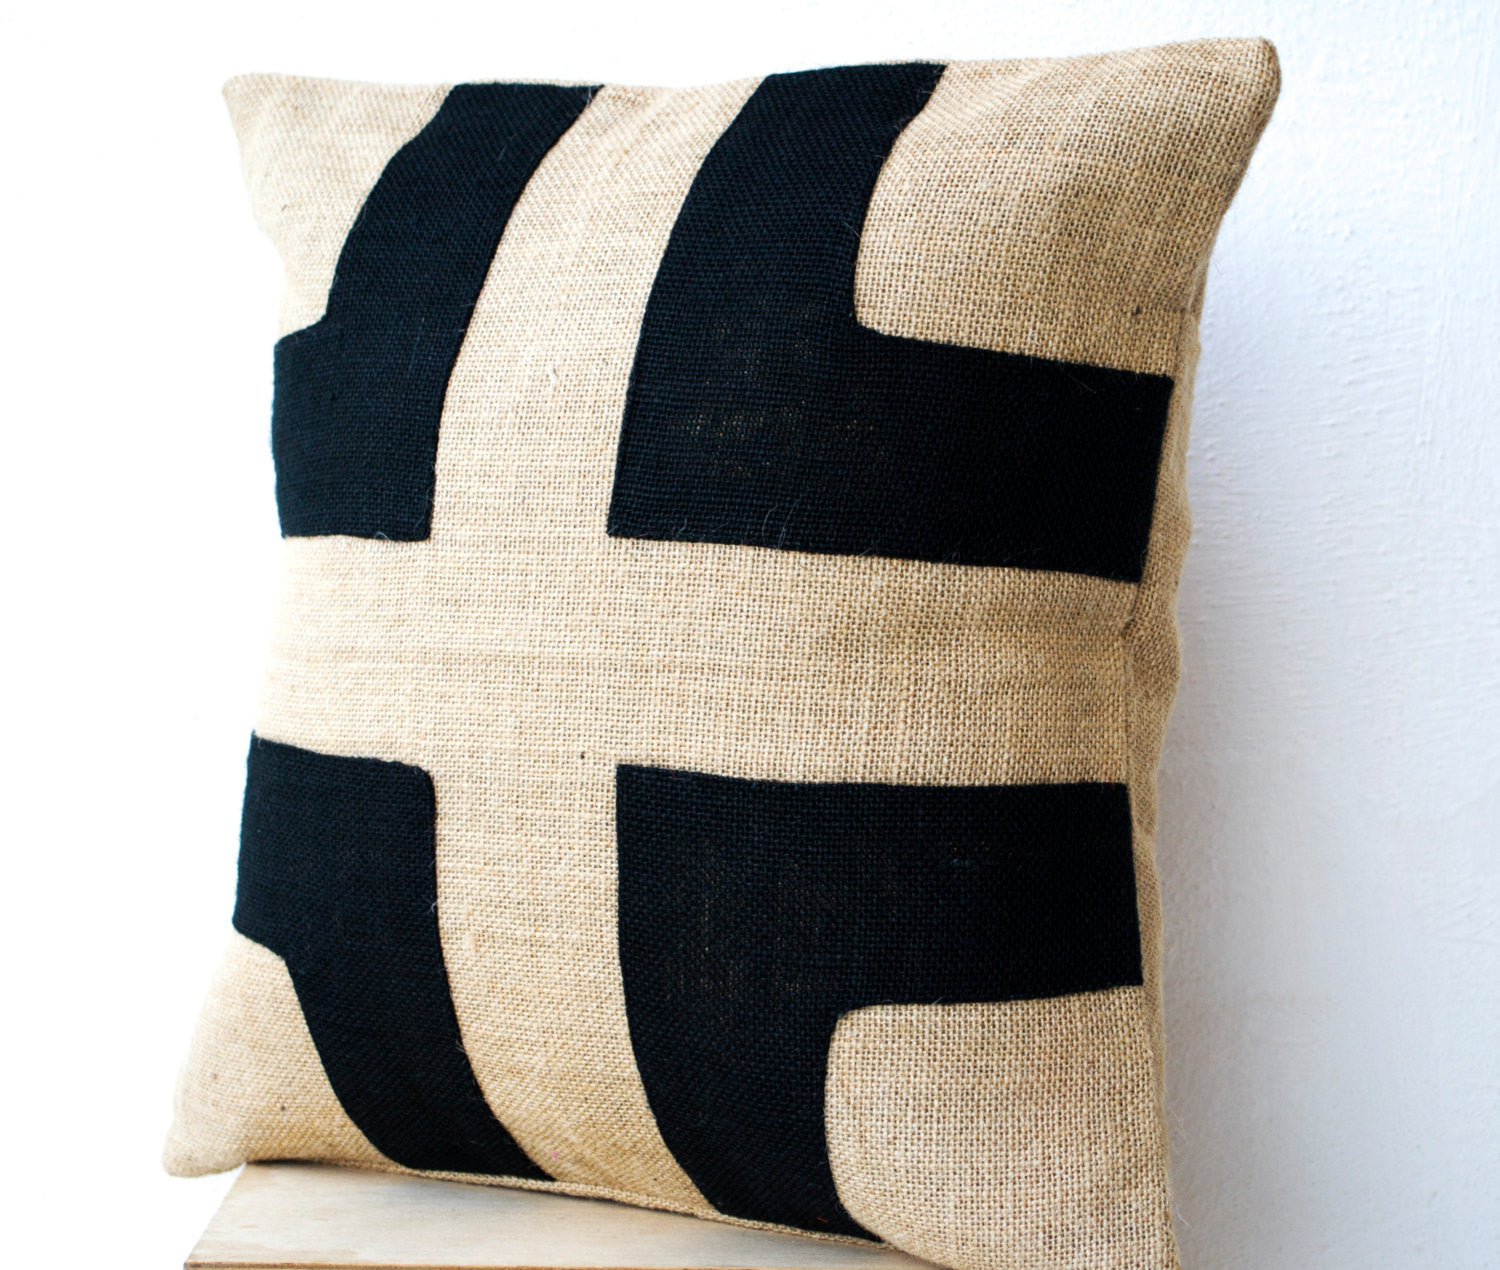 Handmade burlap pillow covers in black and natural beige